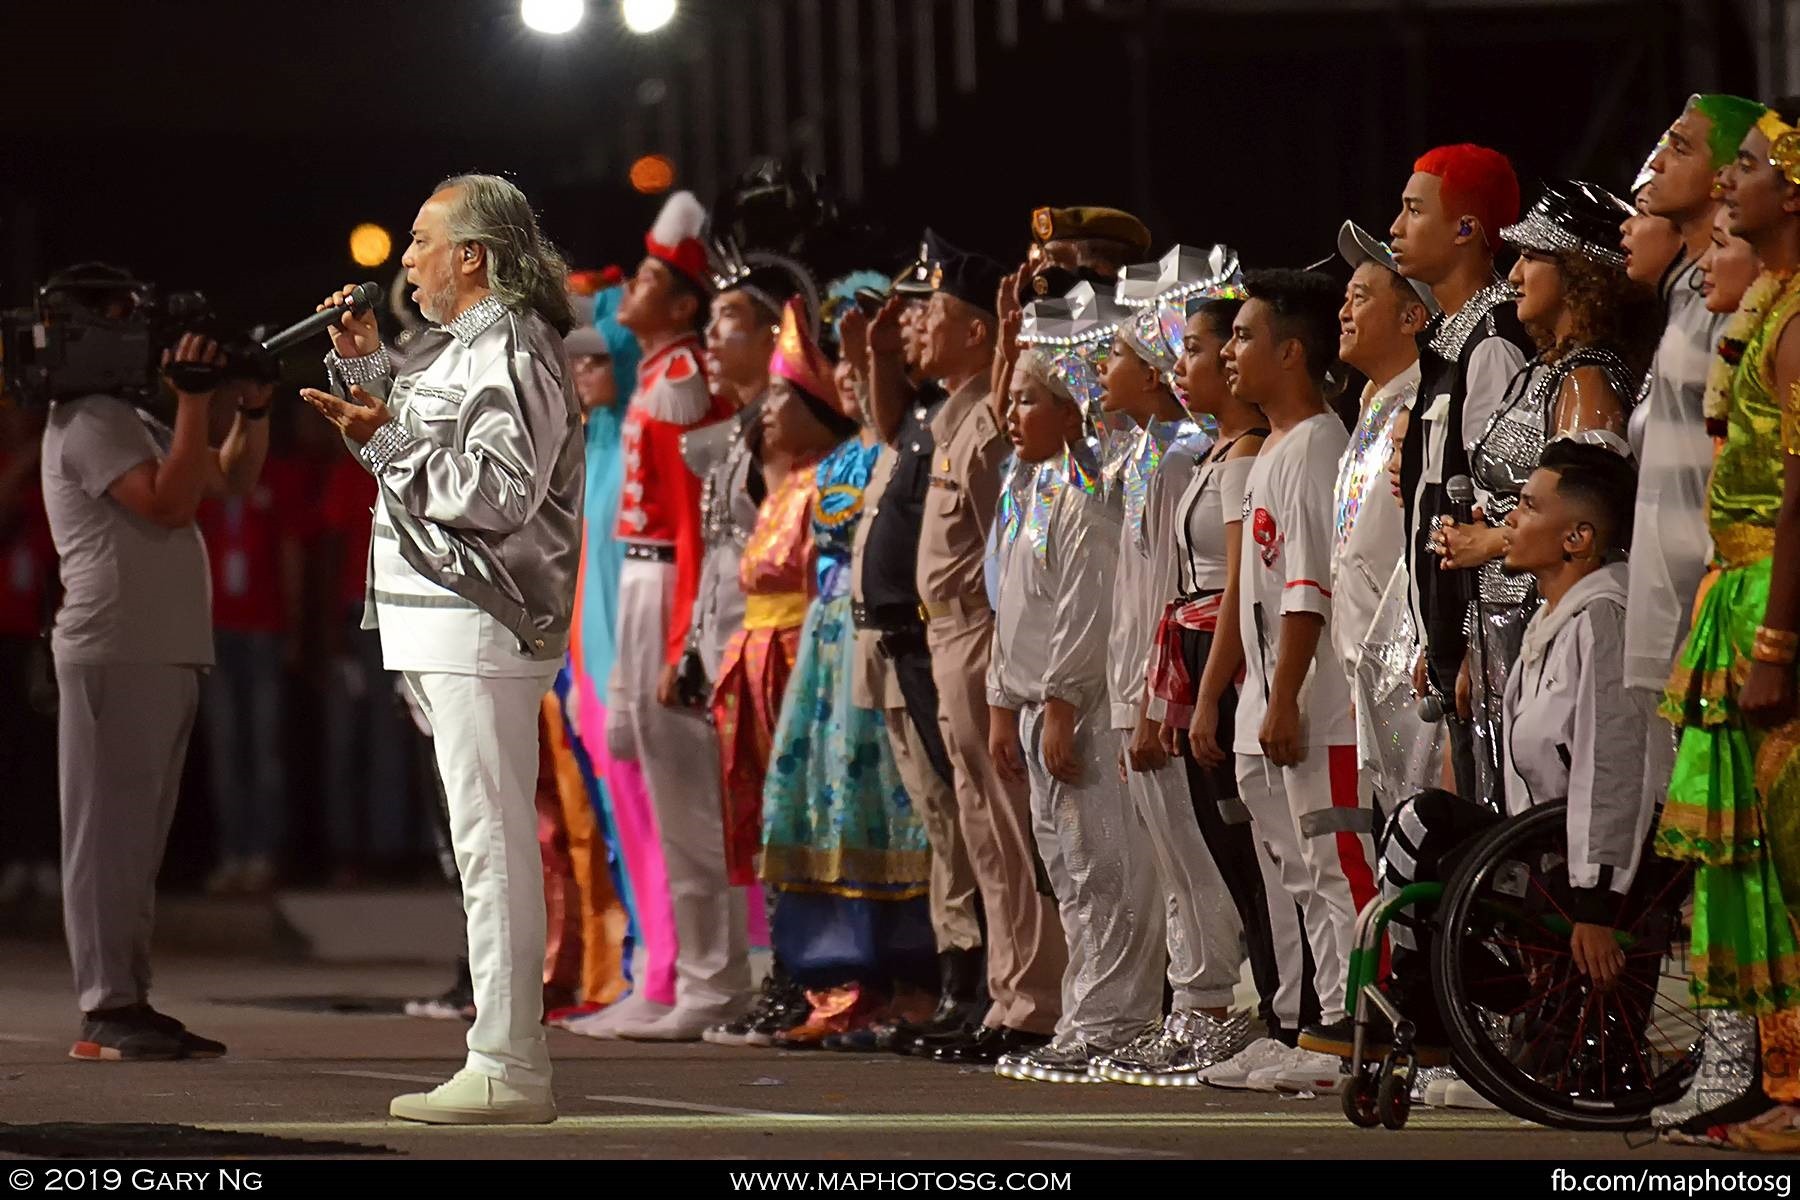 Singapore rock legend Ramli Sarip leads the National Anthem as the celebrations draws to a close